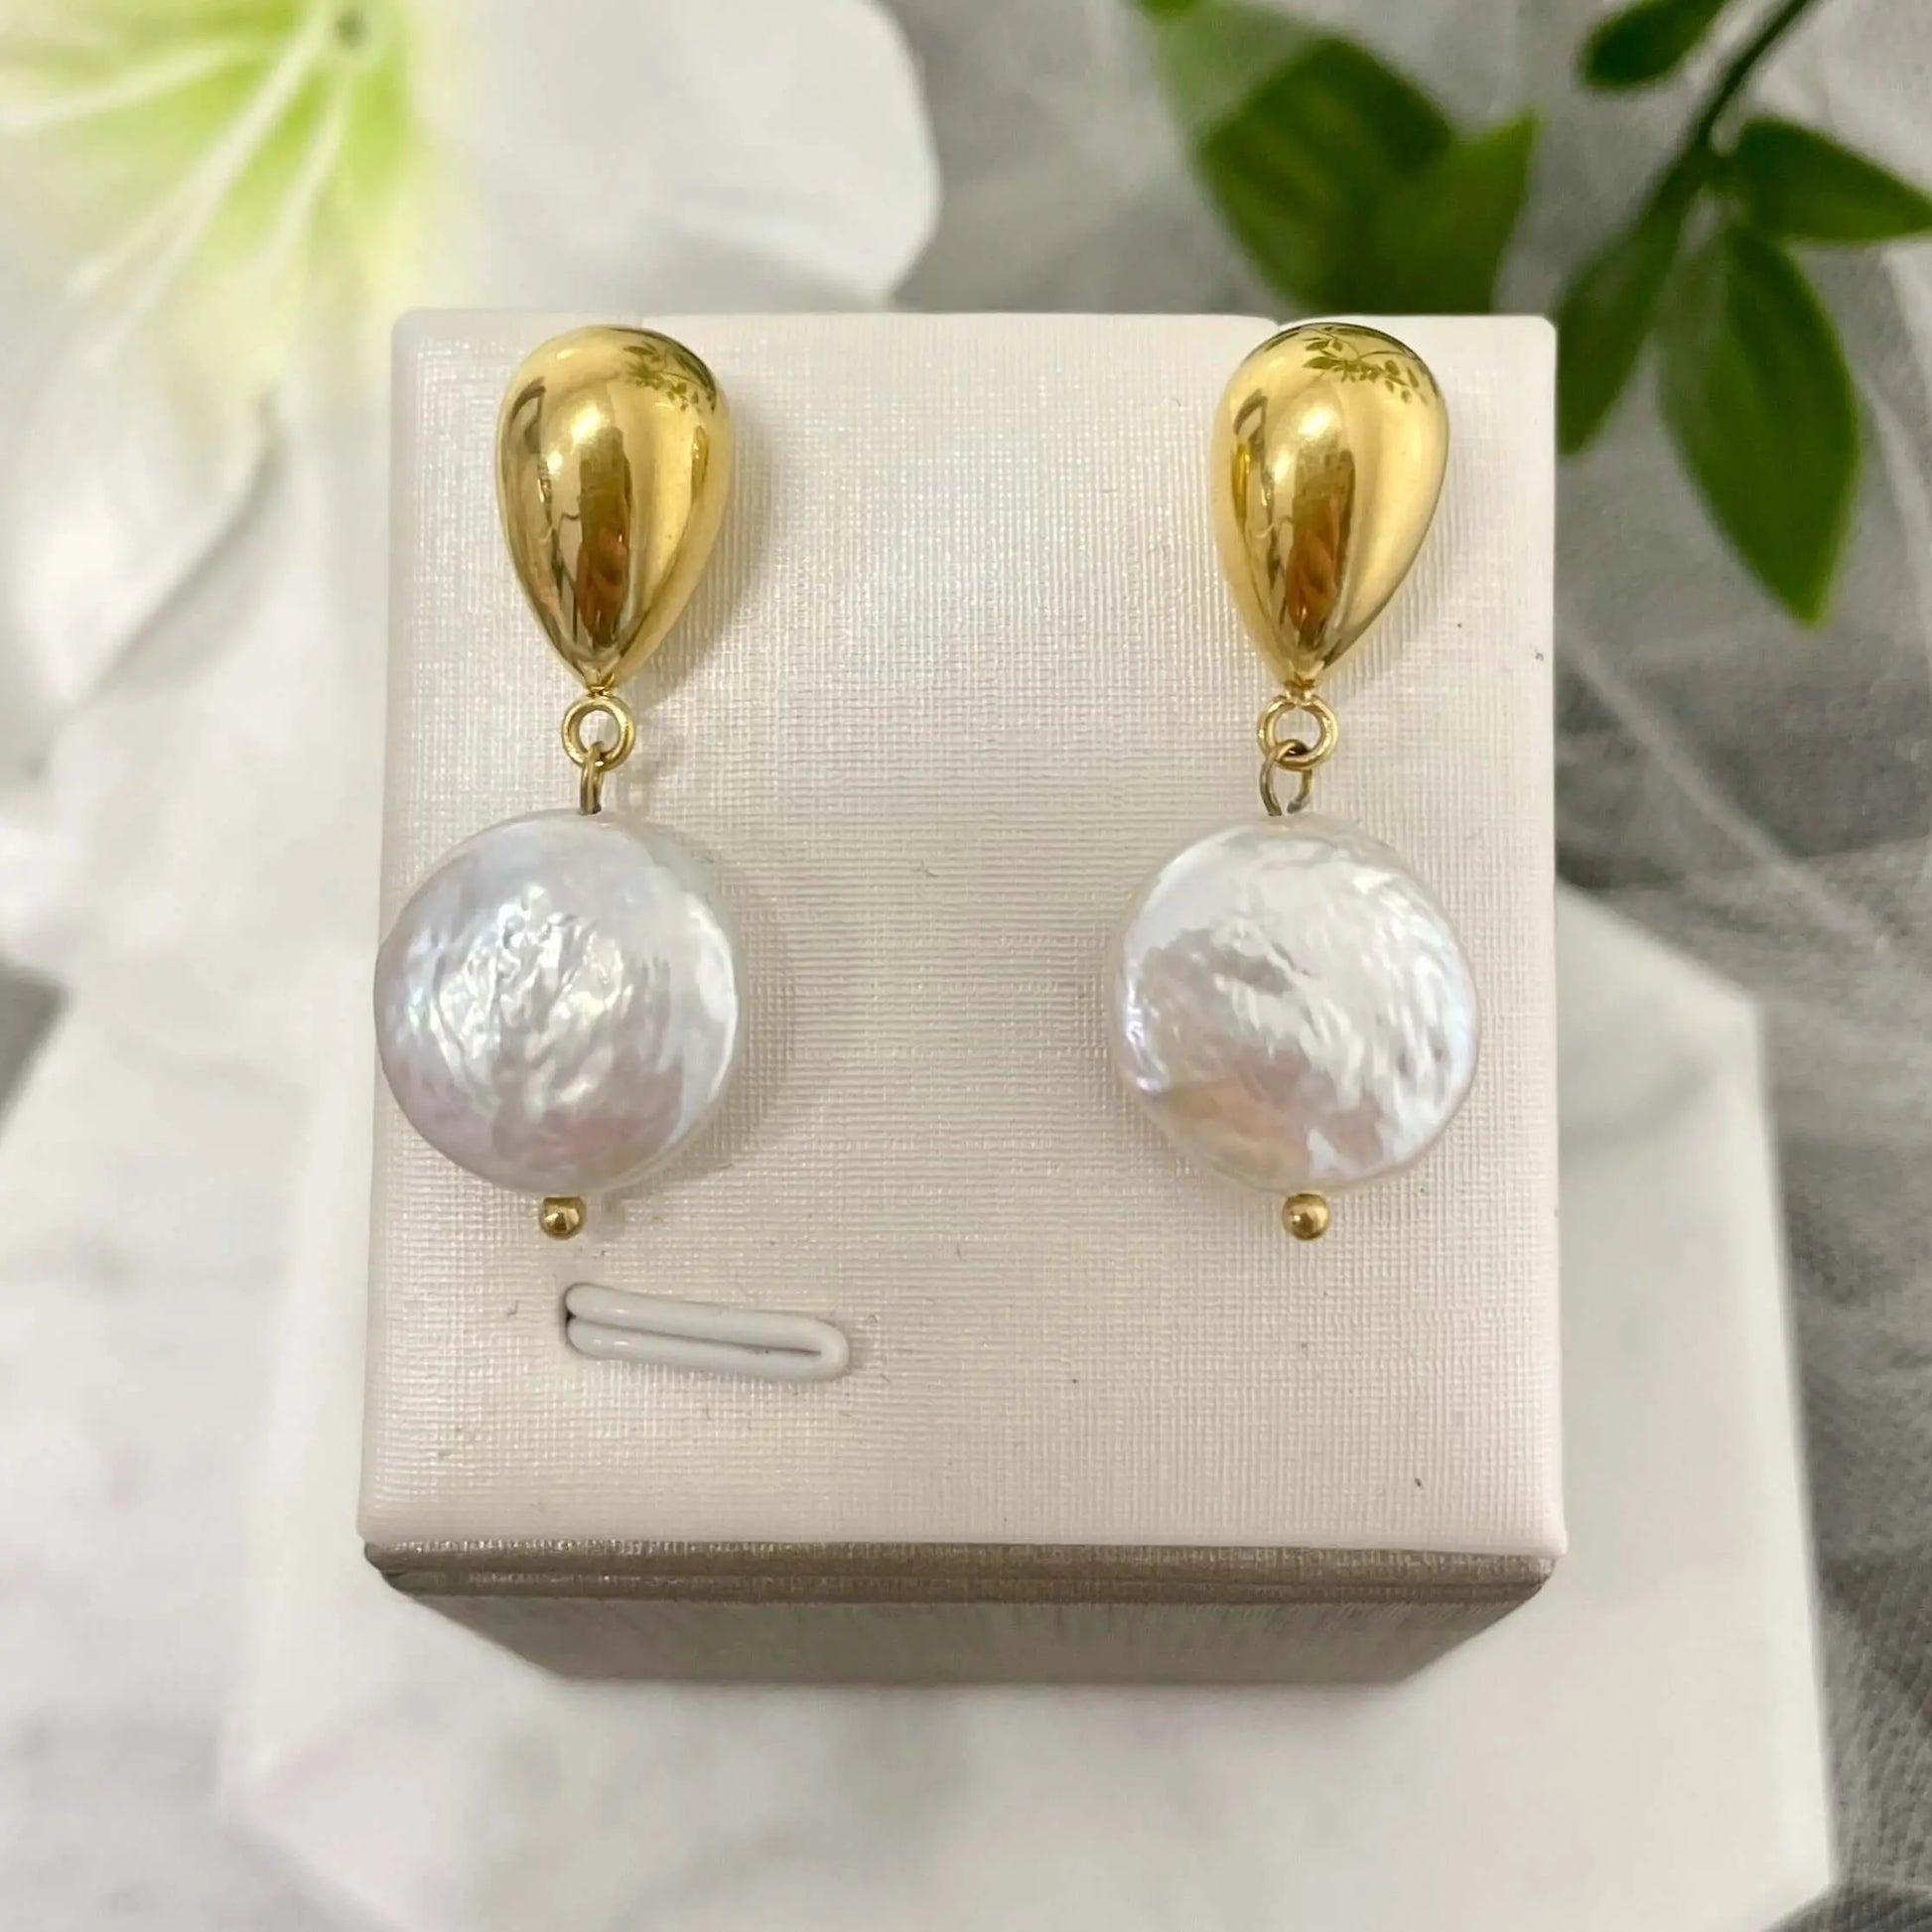 Sally Exquisite Natural Freshwater Pearl Drop Earrings featuring 3 cm long and 1.4 cm wide pearls, crafted from stainless steel, trendy and waterproof jewellery for women.